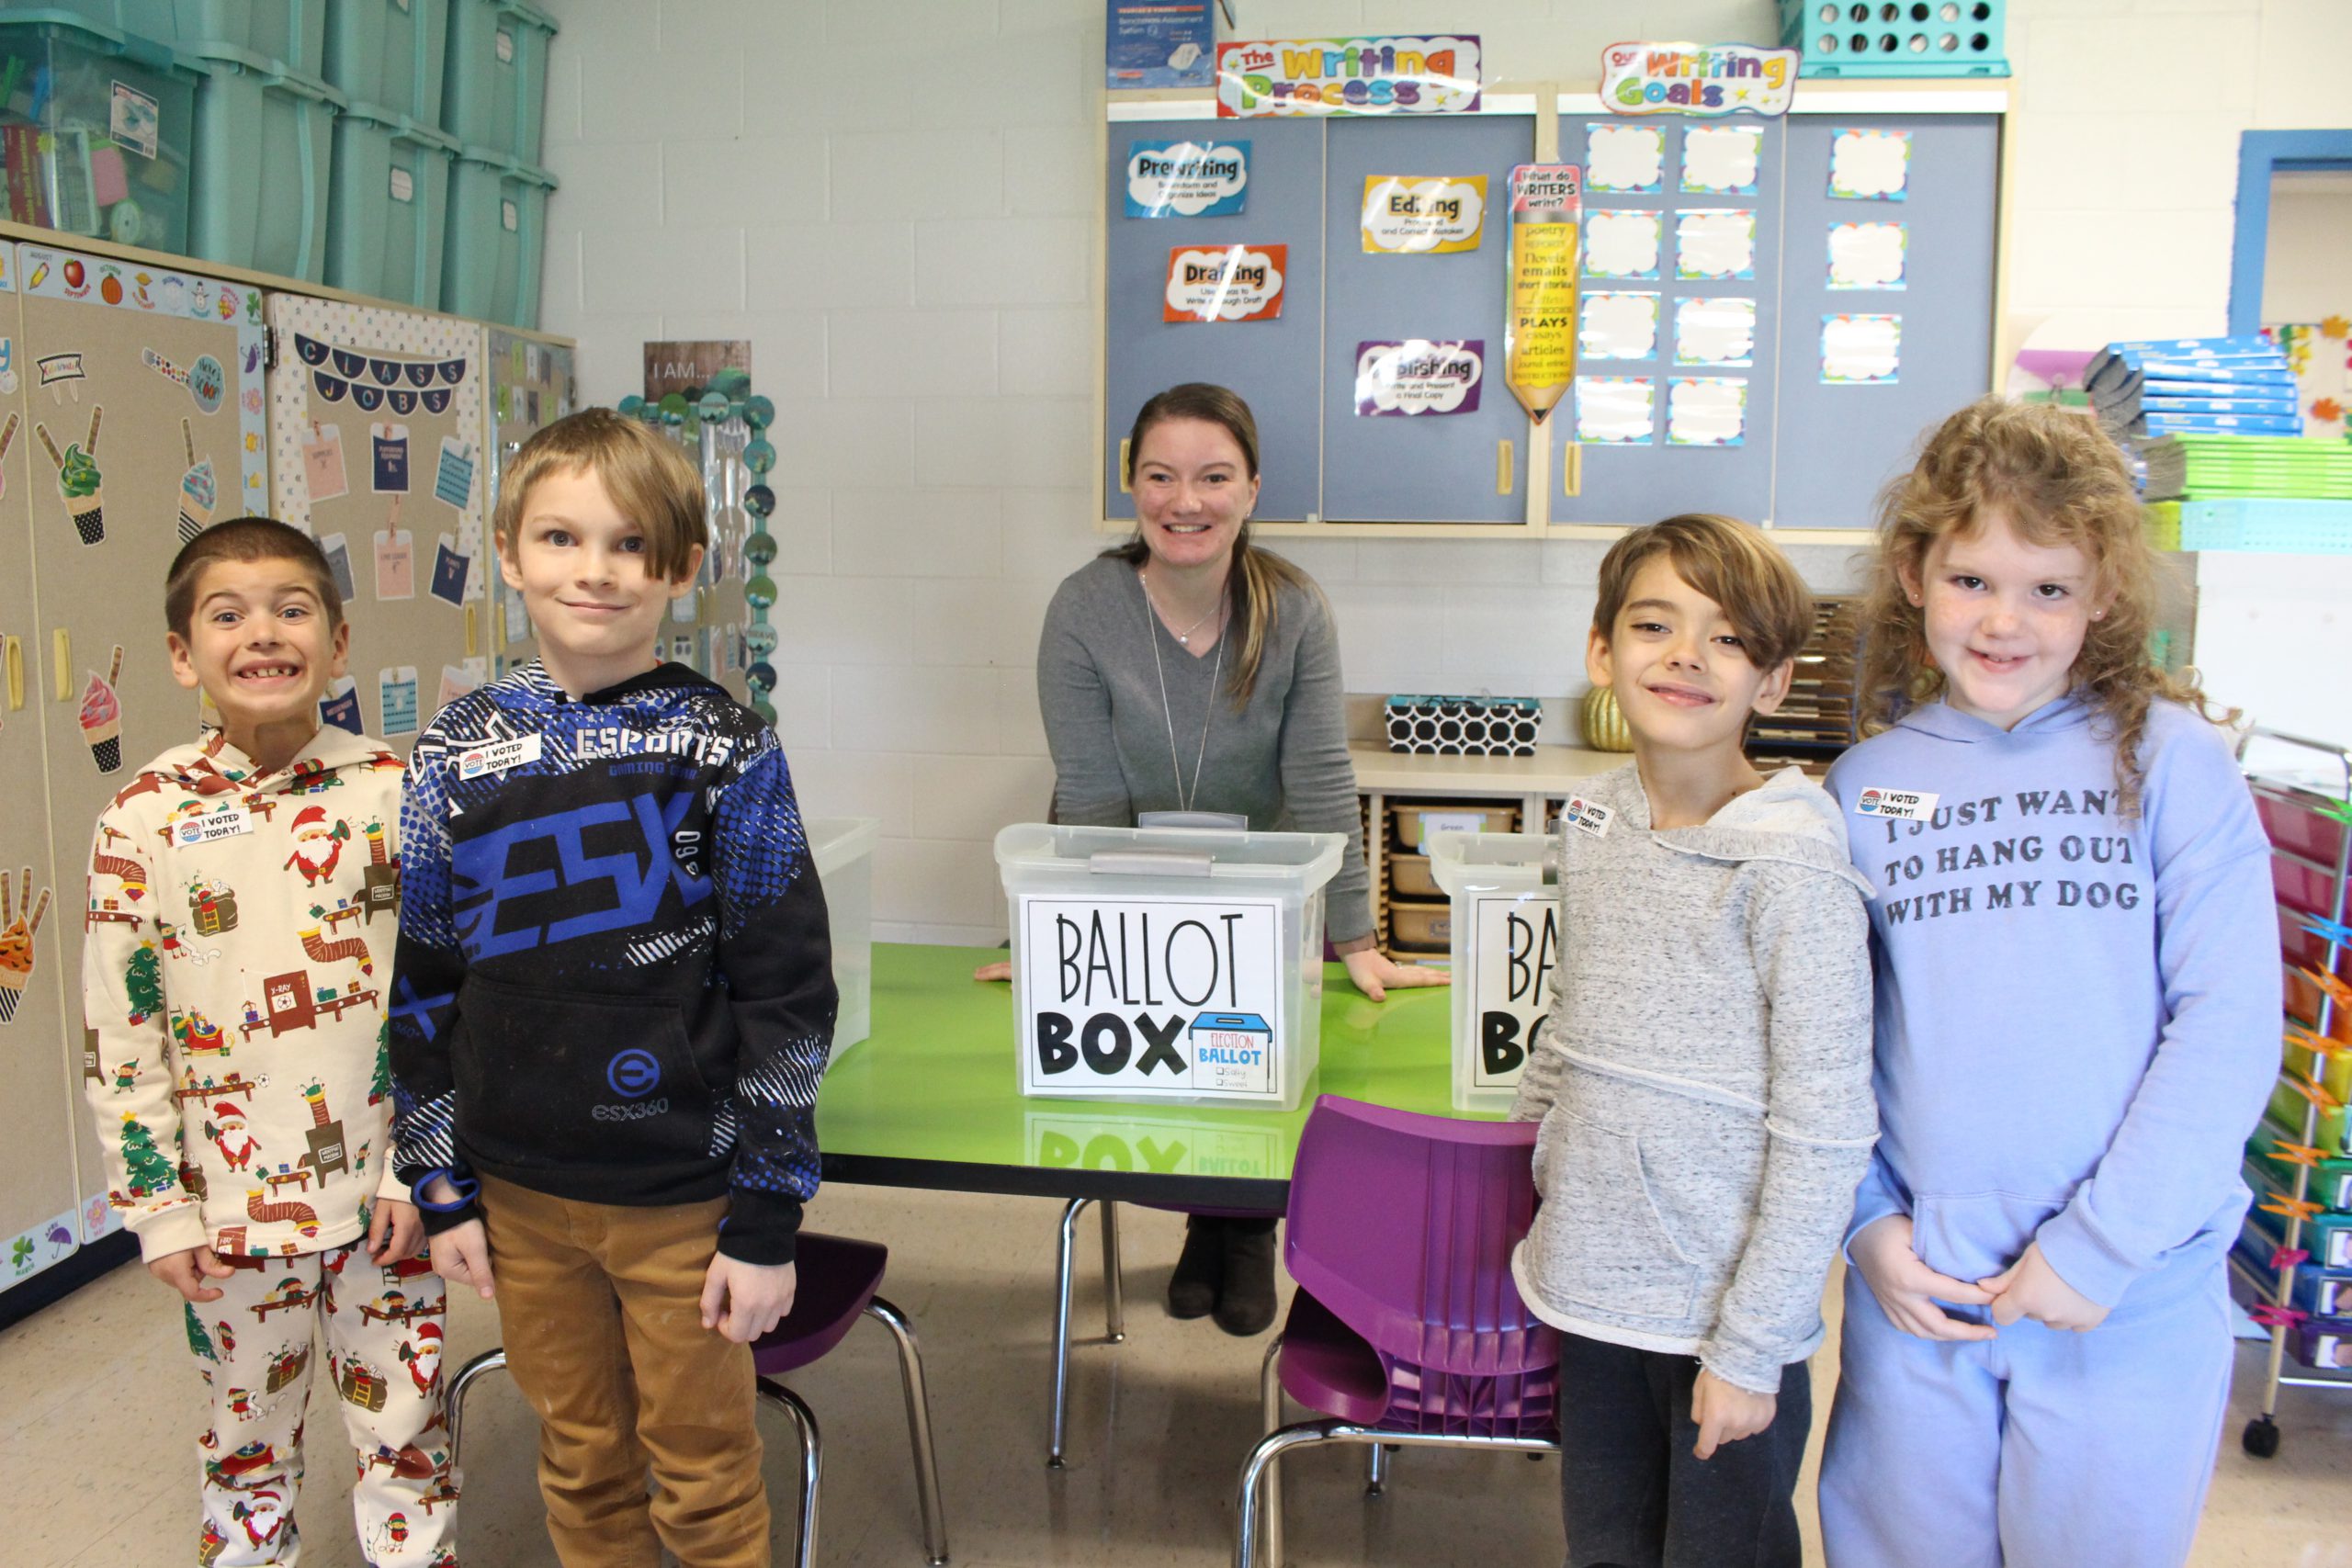 four students are standing with their teacher and smiling. In the middle there is a box with a sign on it that reads "ballot box"